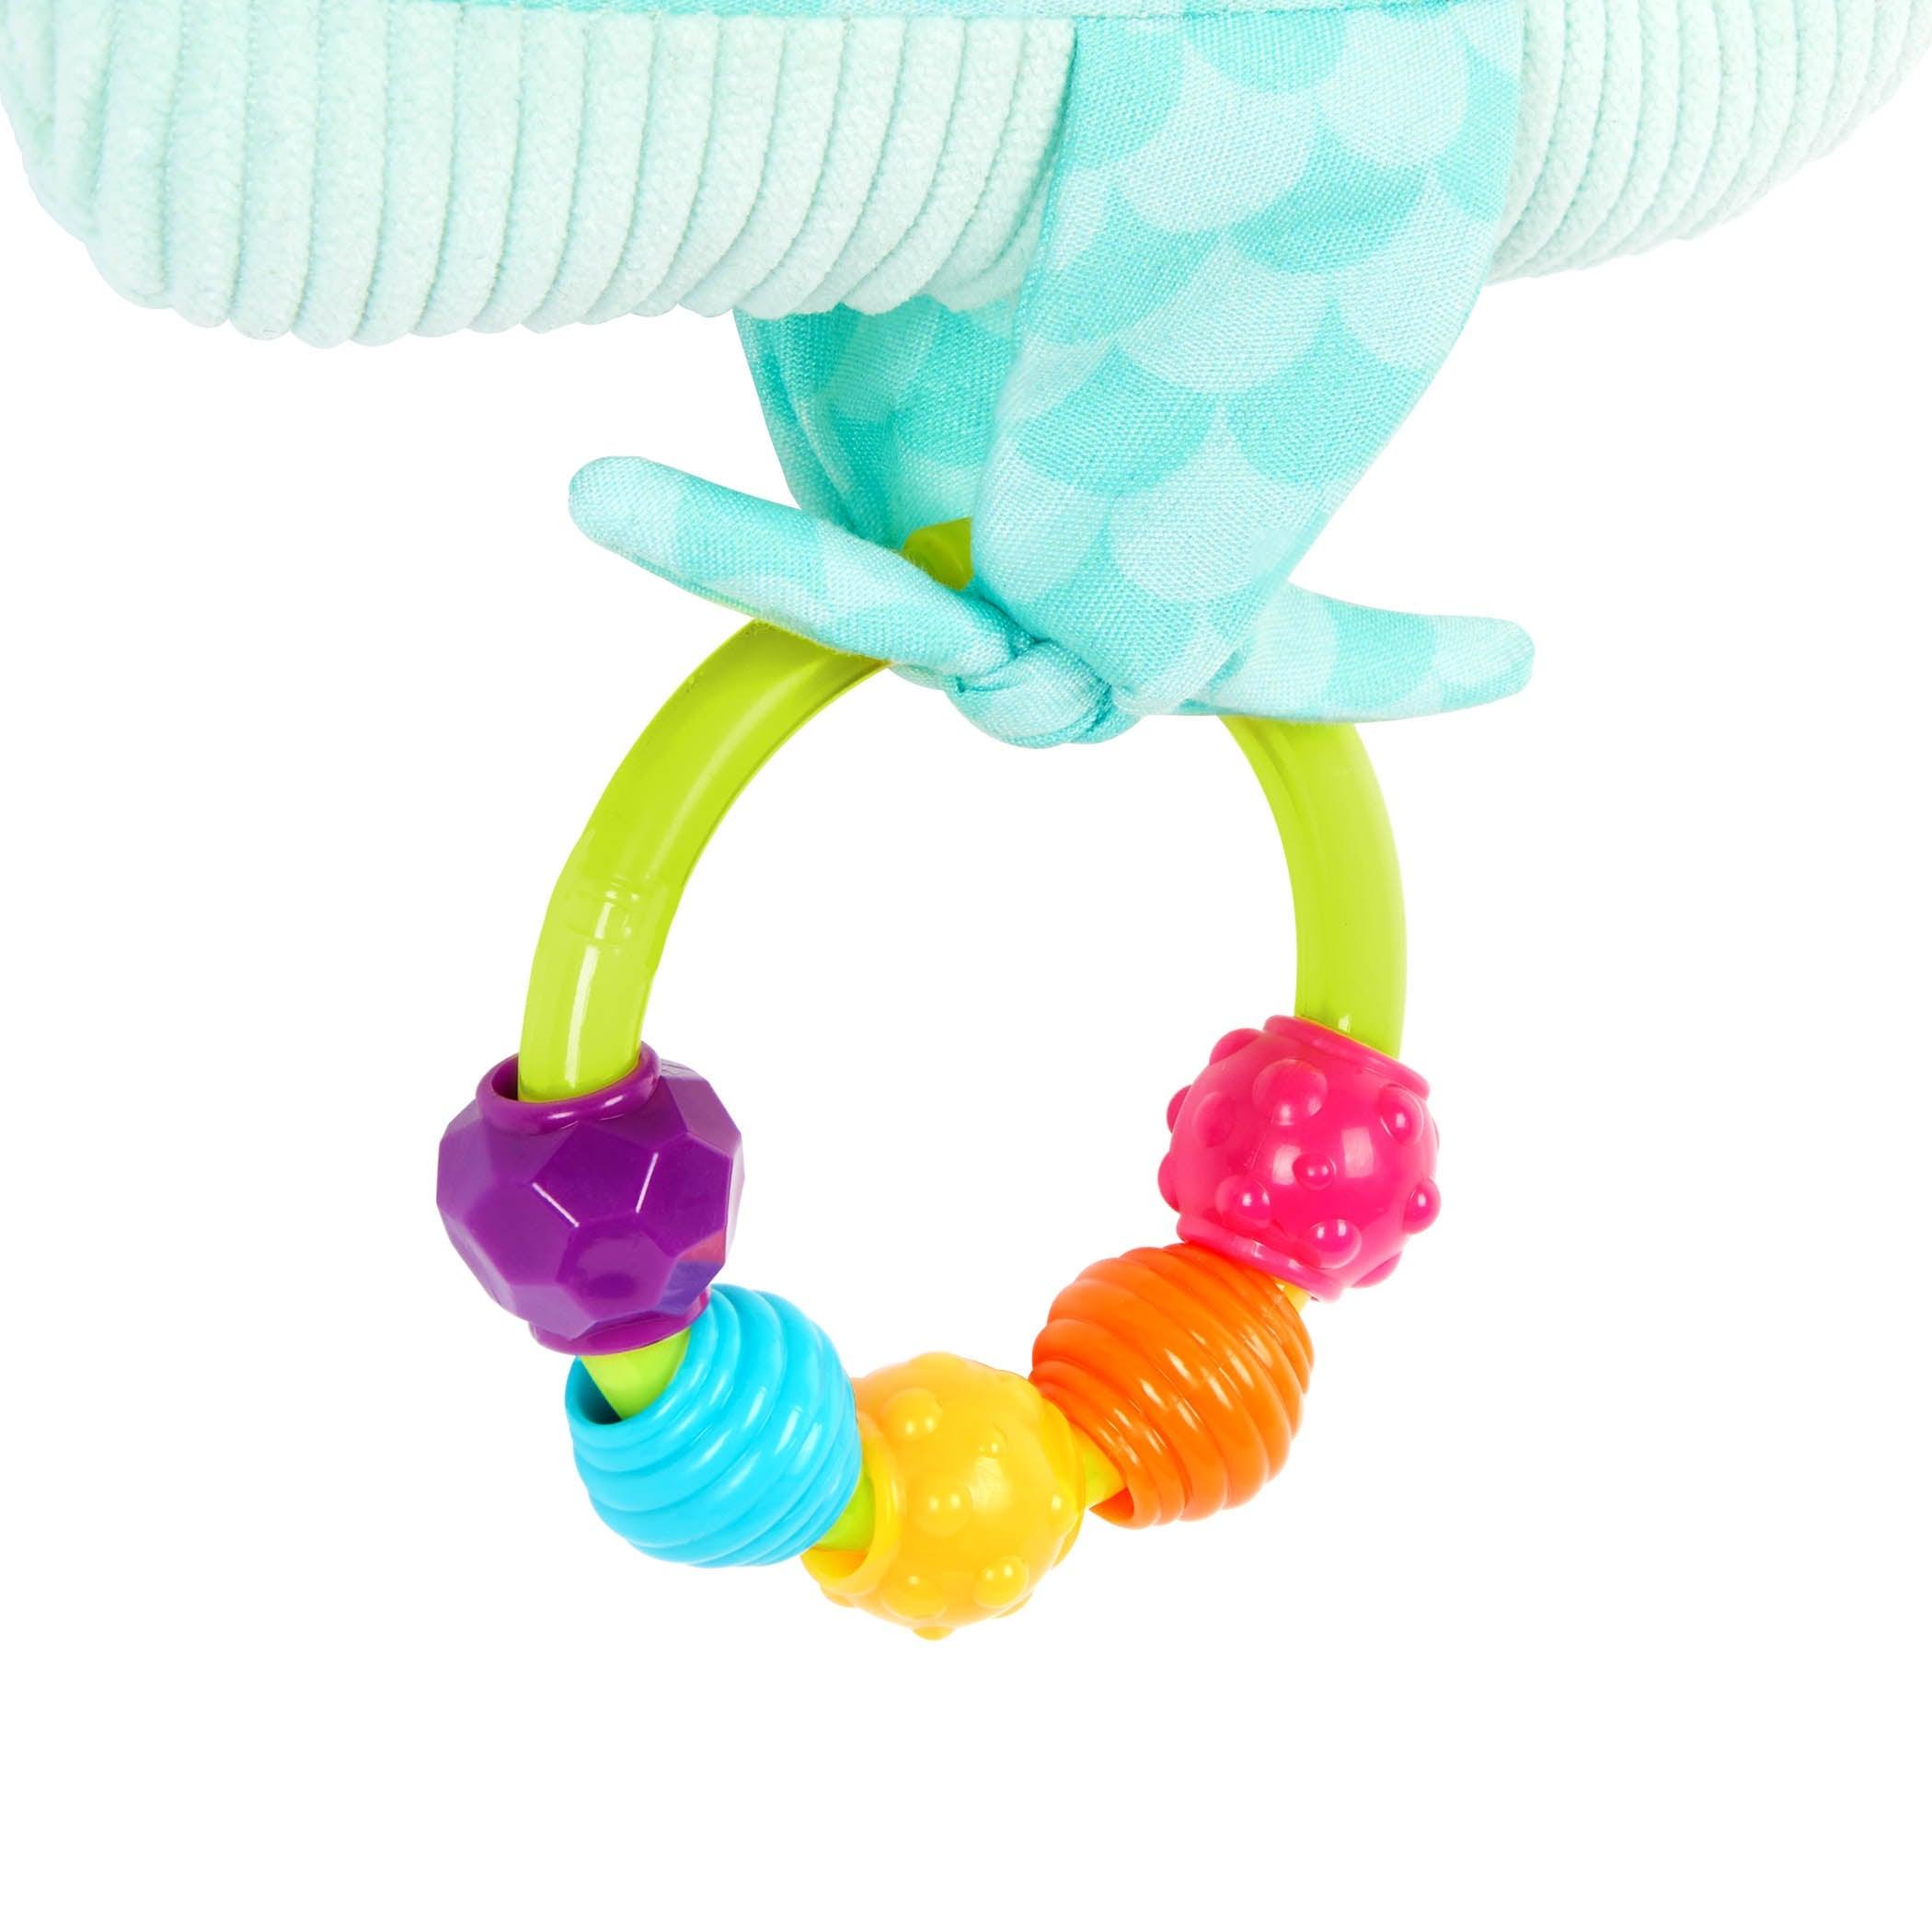 B.Toys: Whimsy Whale Sensory Rattle